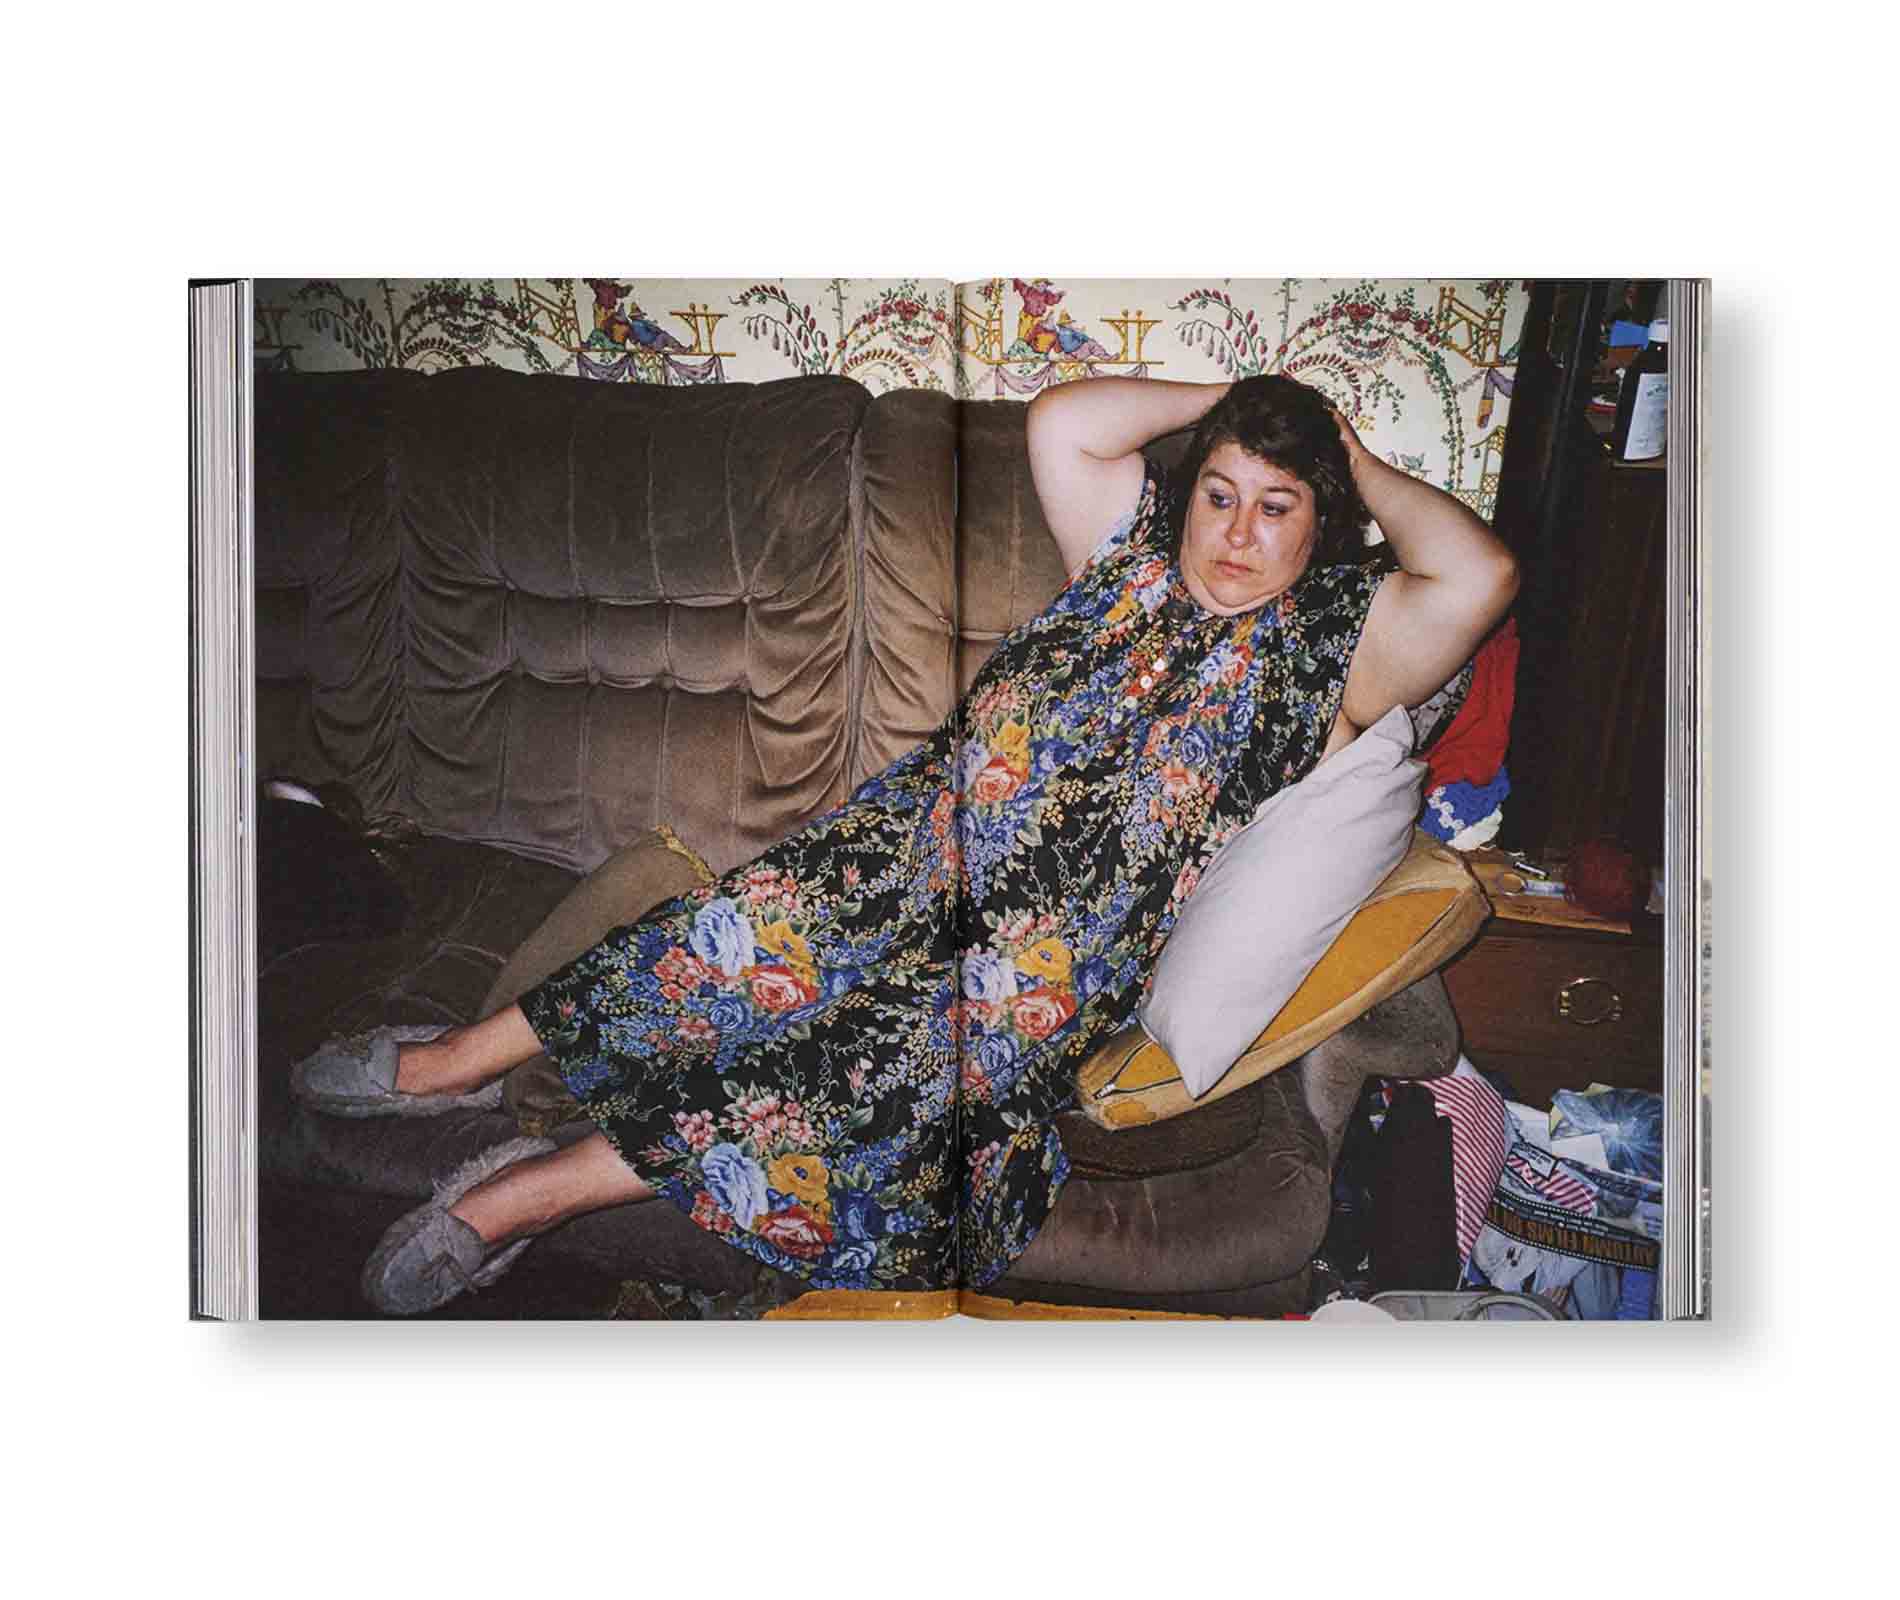 RAY’S A LAUGH by Richard Billingham